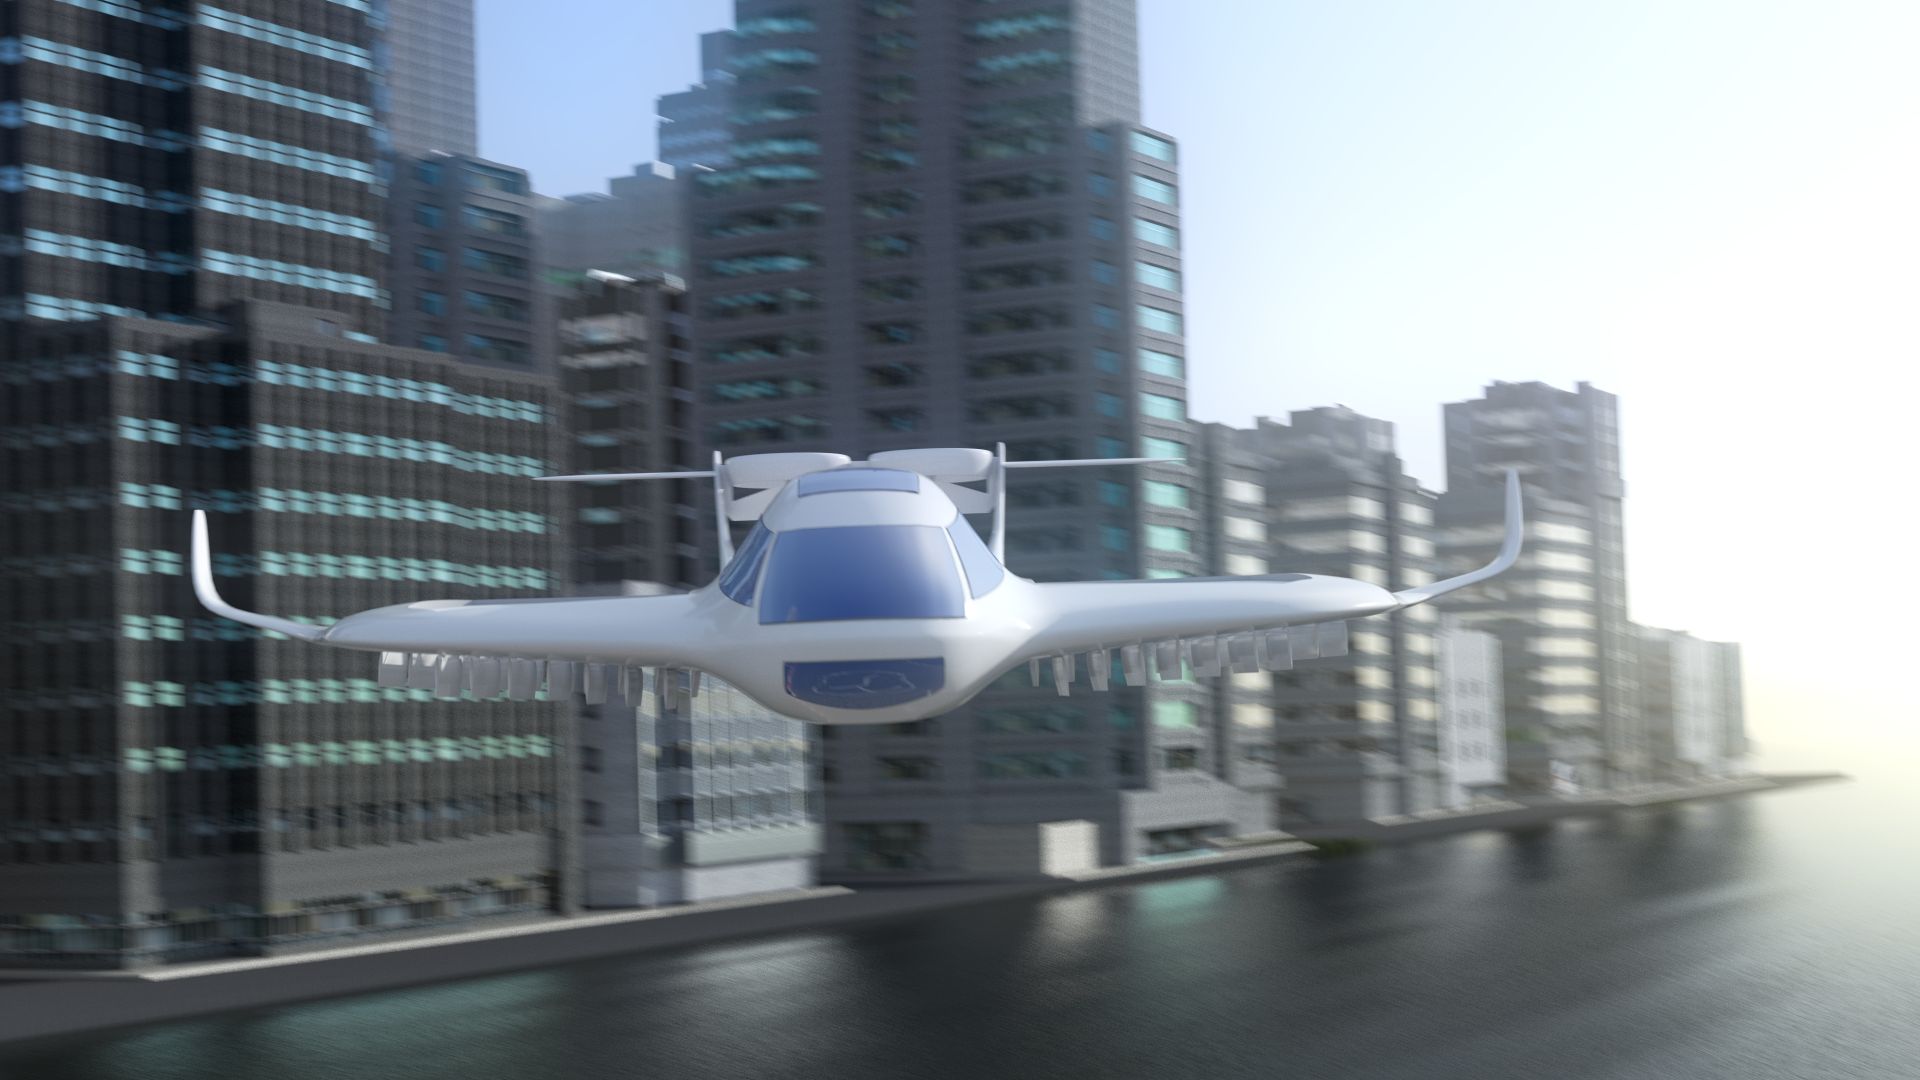 The Ray can take-off and land almost anywhere - like a helicopter